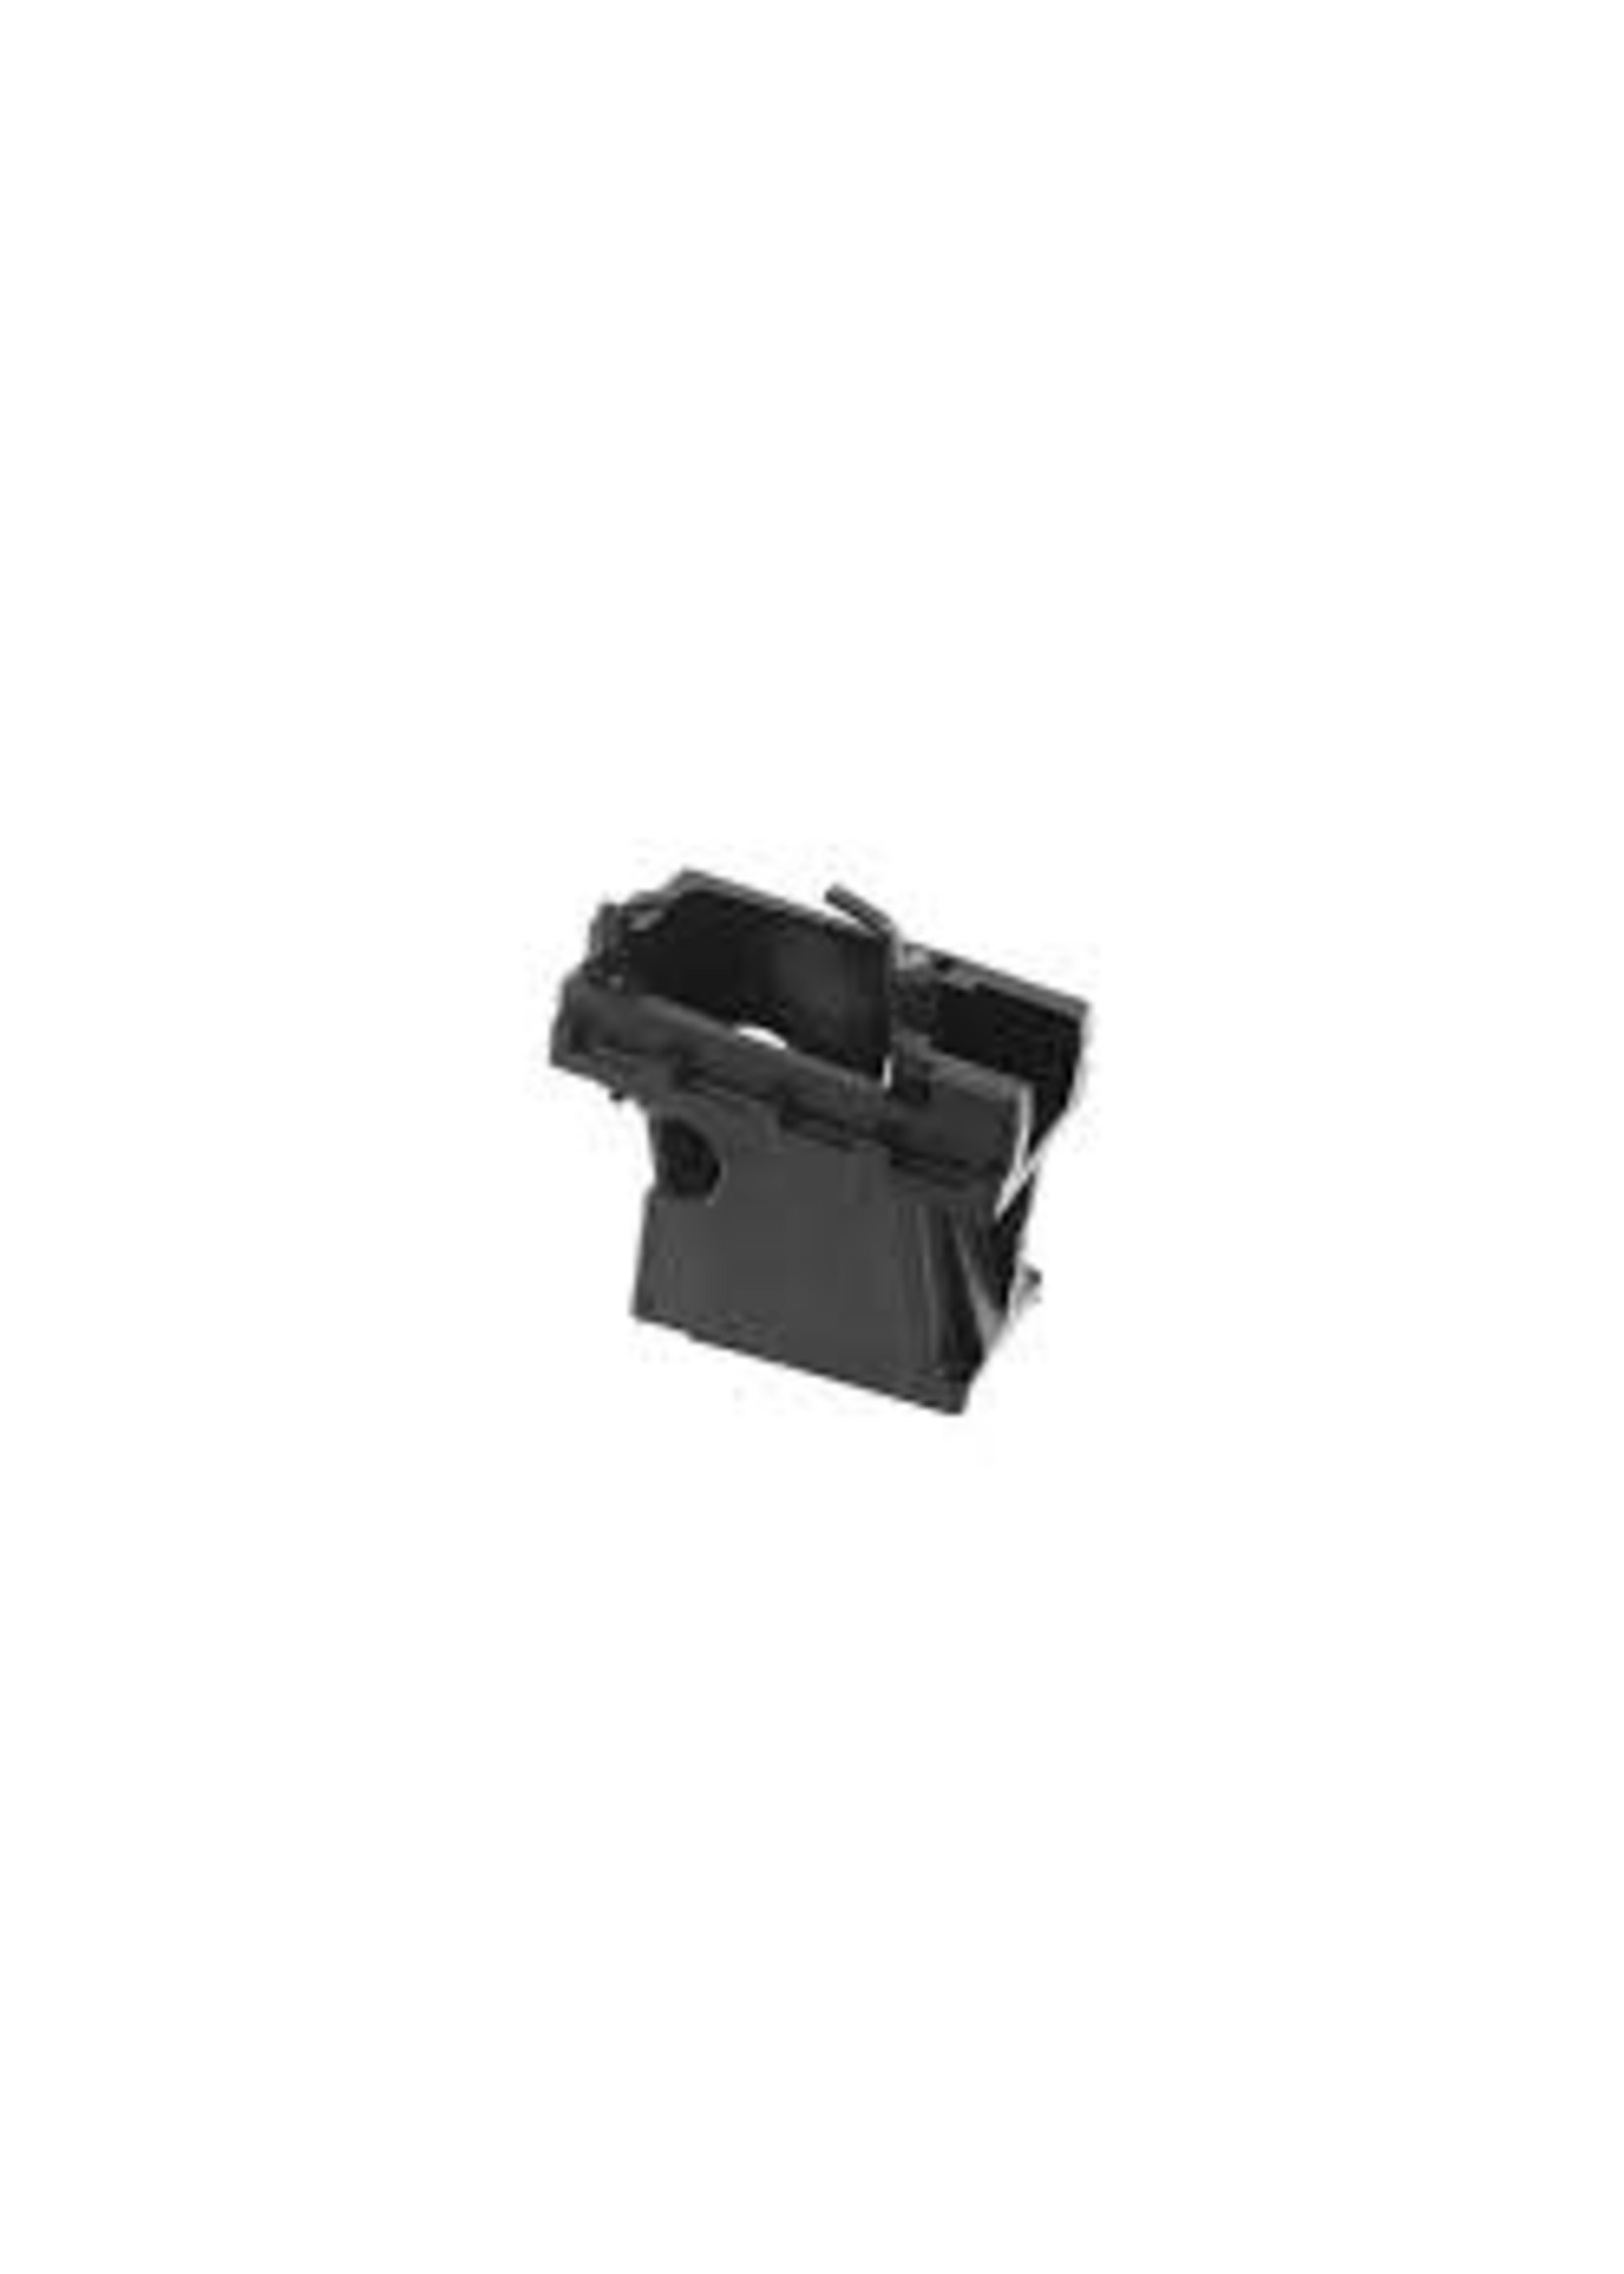 RUGER RUGER MAGAZINE WELL ASSEMBLY GLOCK STYLE FIR RUGER PC CARBINE